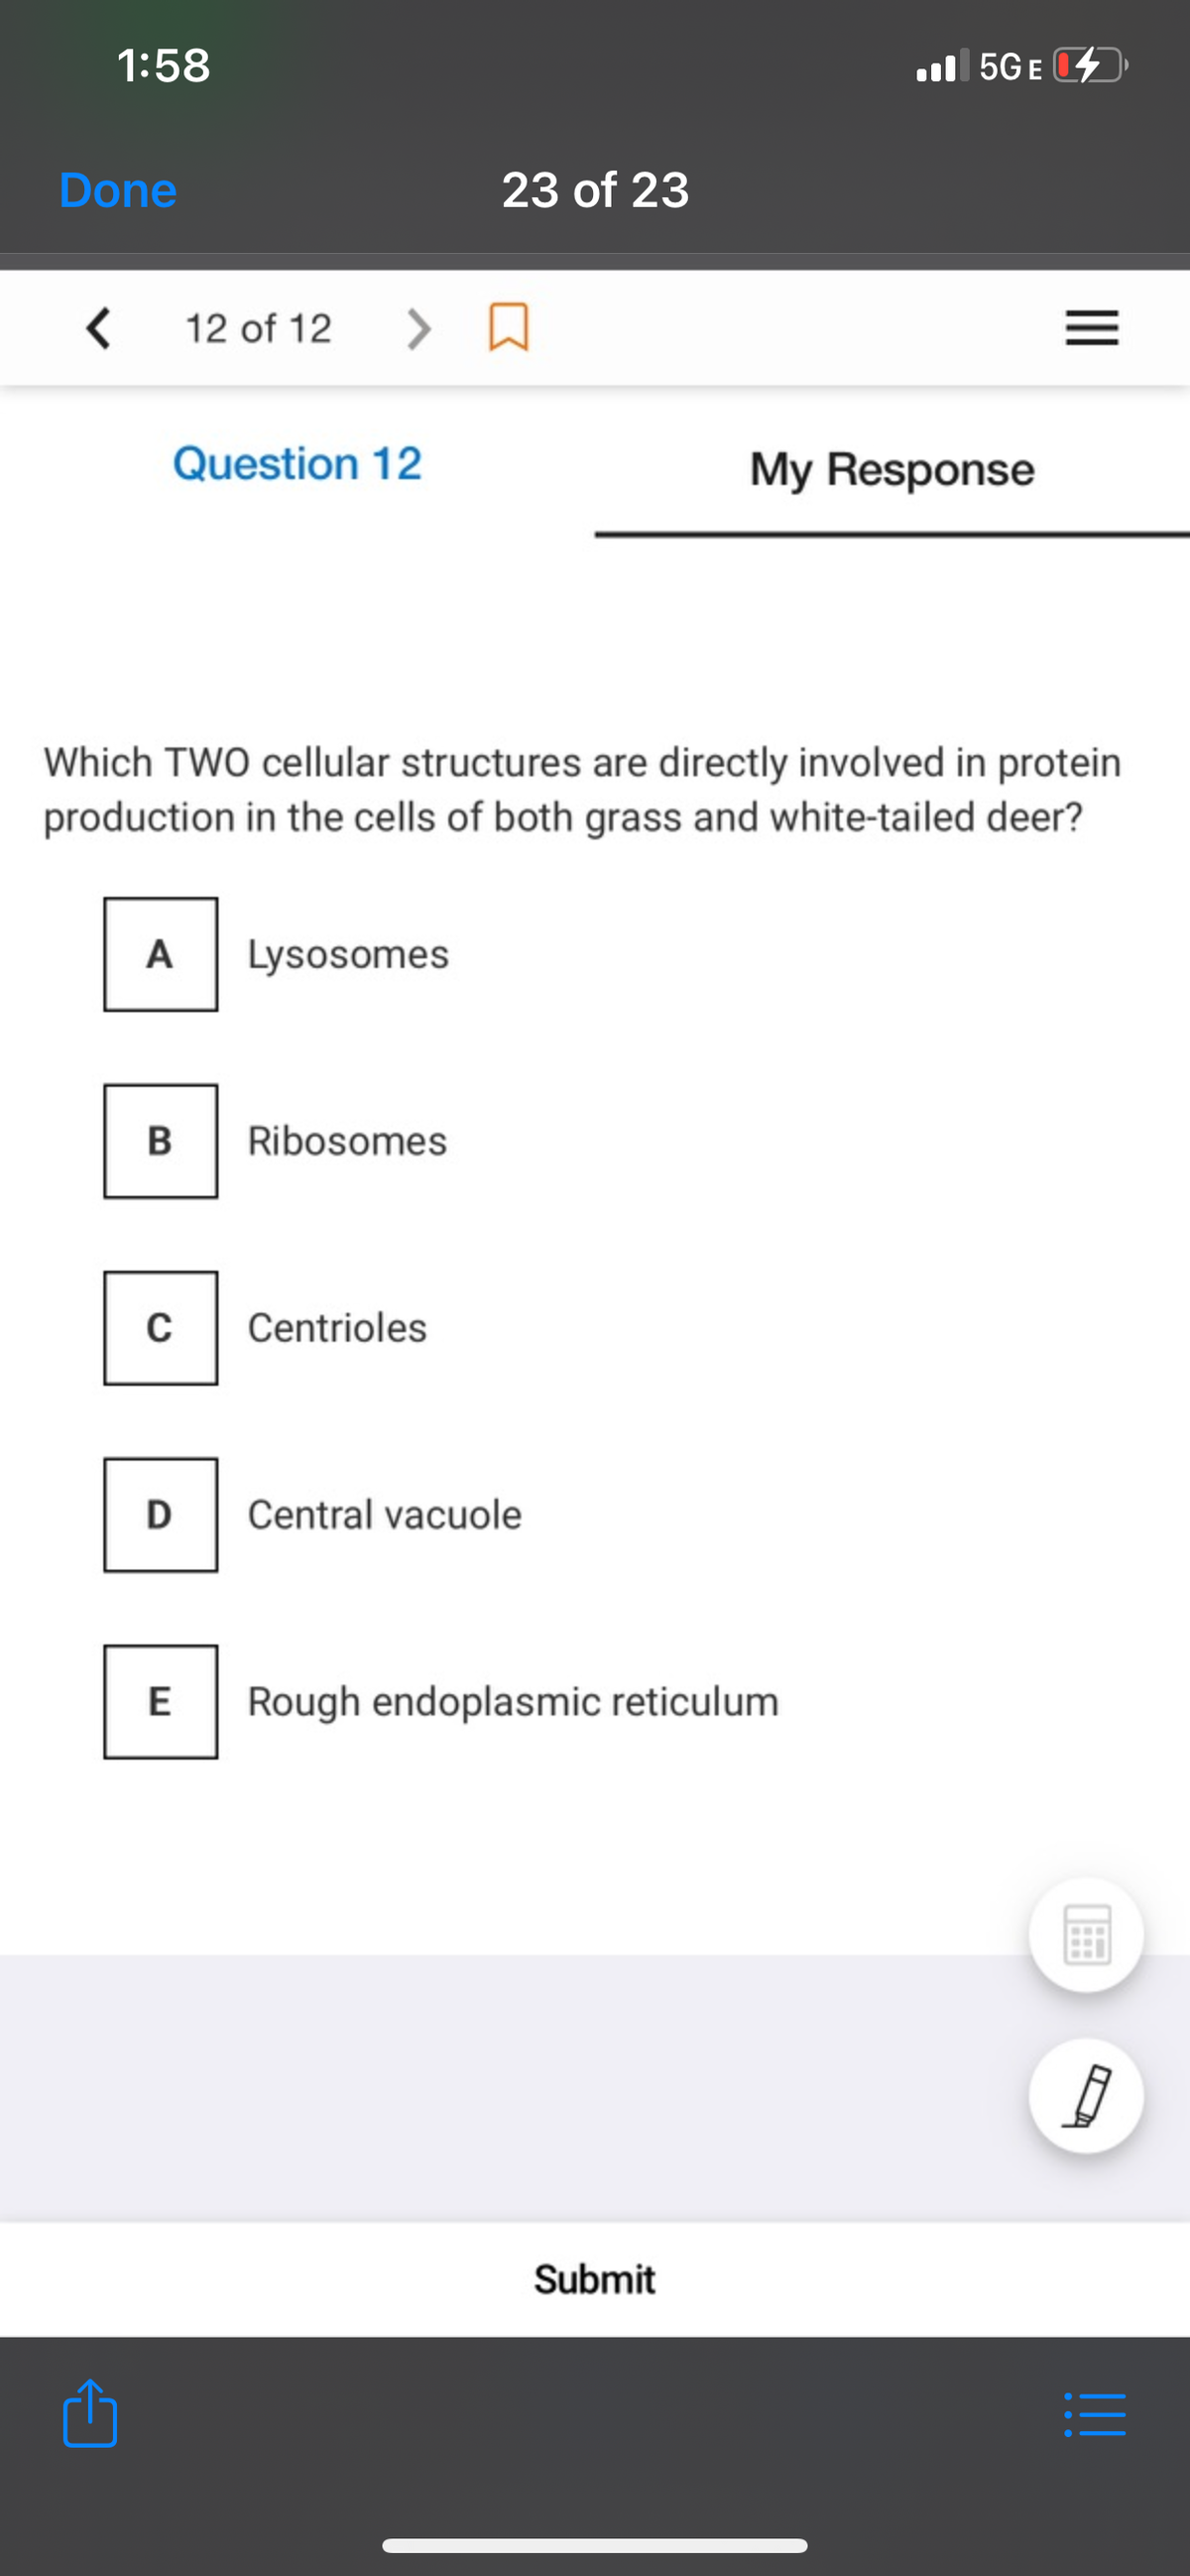 1:58
l 5GE
Done
23 of 23
12 of 12
Question 12
My Response
Which TWO cellular structures are directly involved in protein
production in the cells of both grass and white-tailed deer?
A
Lysosomes
Ribosomes
Centrioles
D
Central vacuole
E
Rough endoplasmic reticulum
Submit
II
